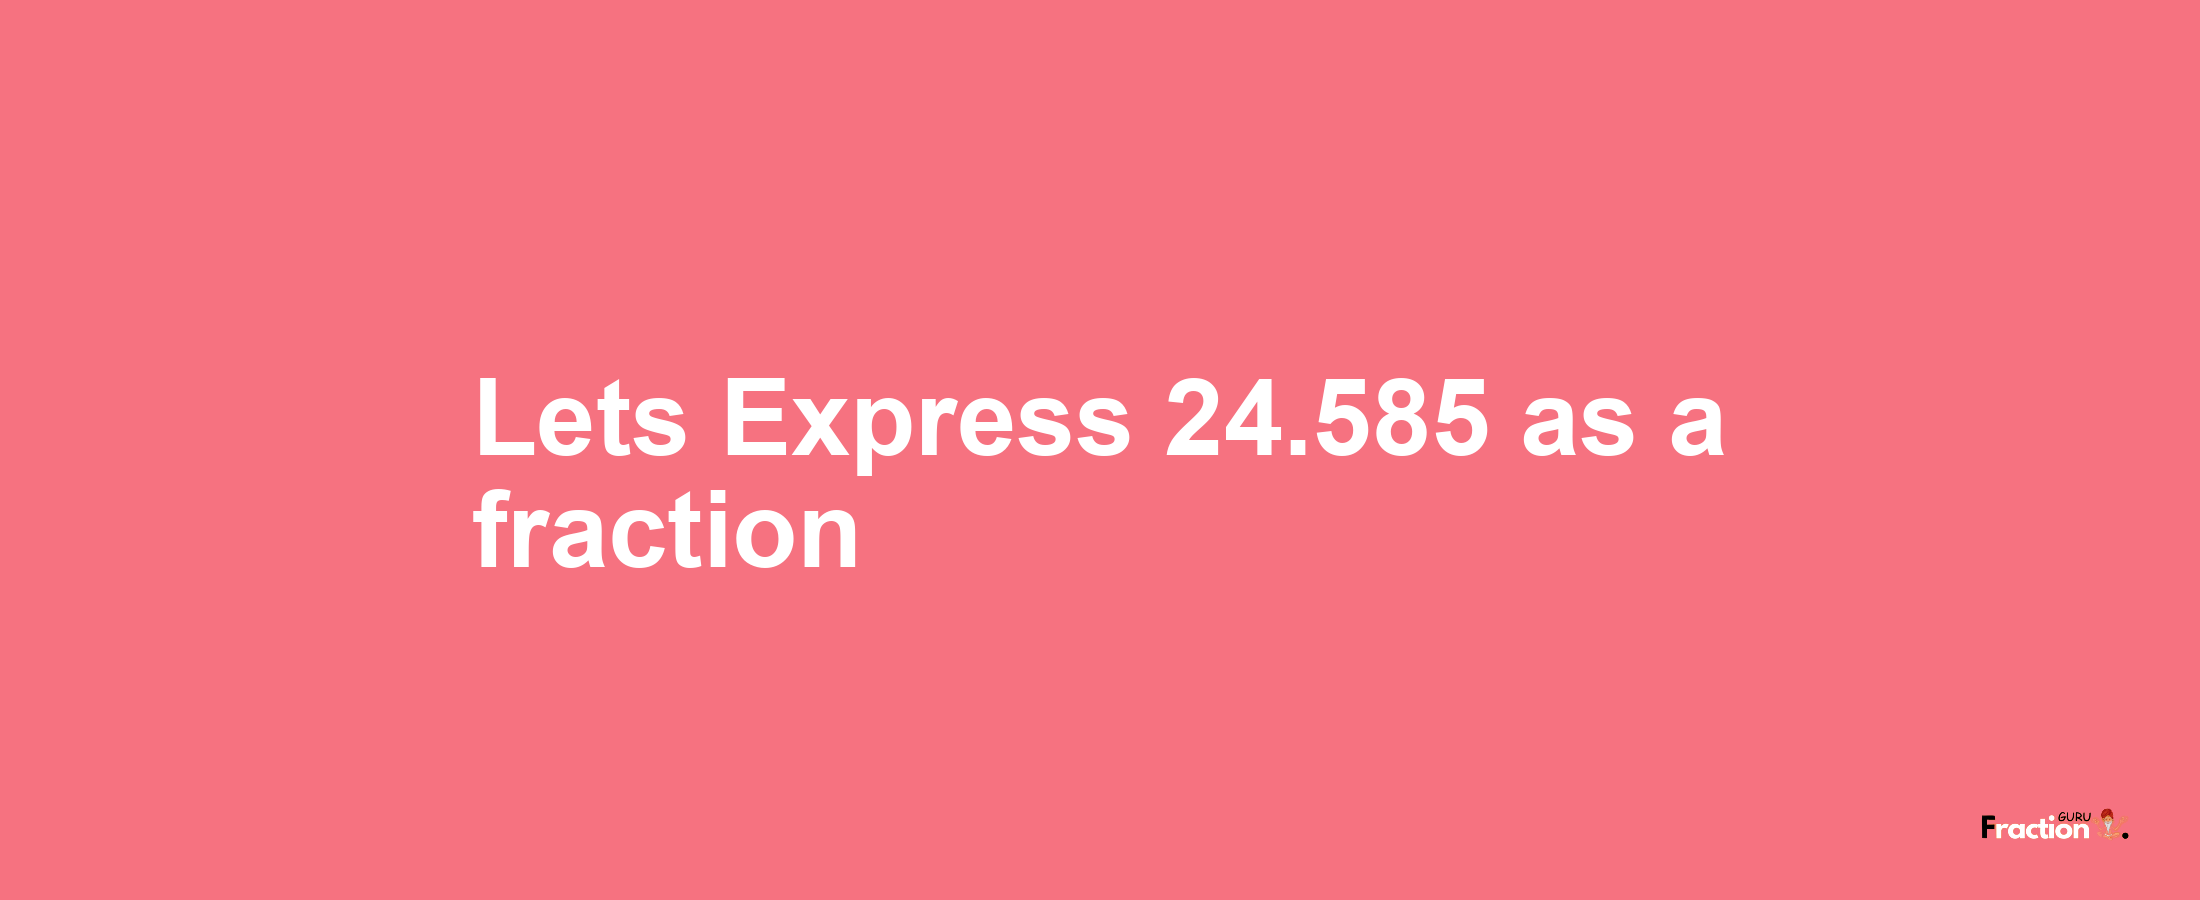 Lets Express 24.585 as afraction